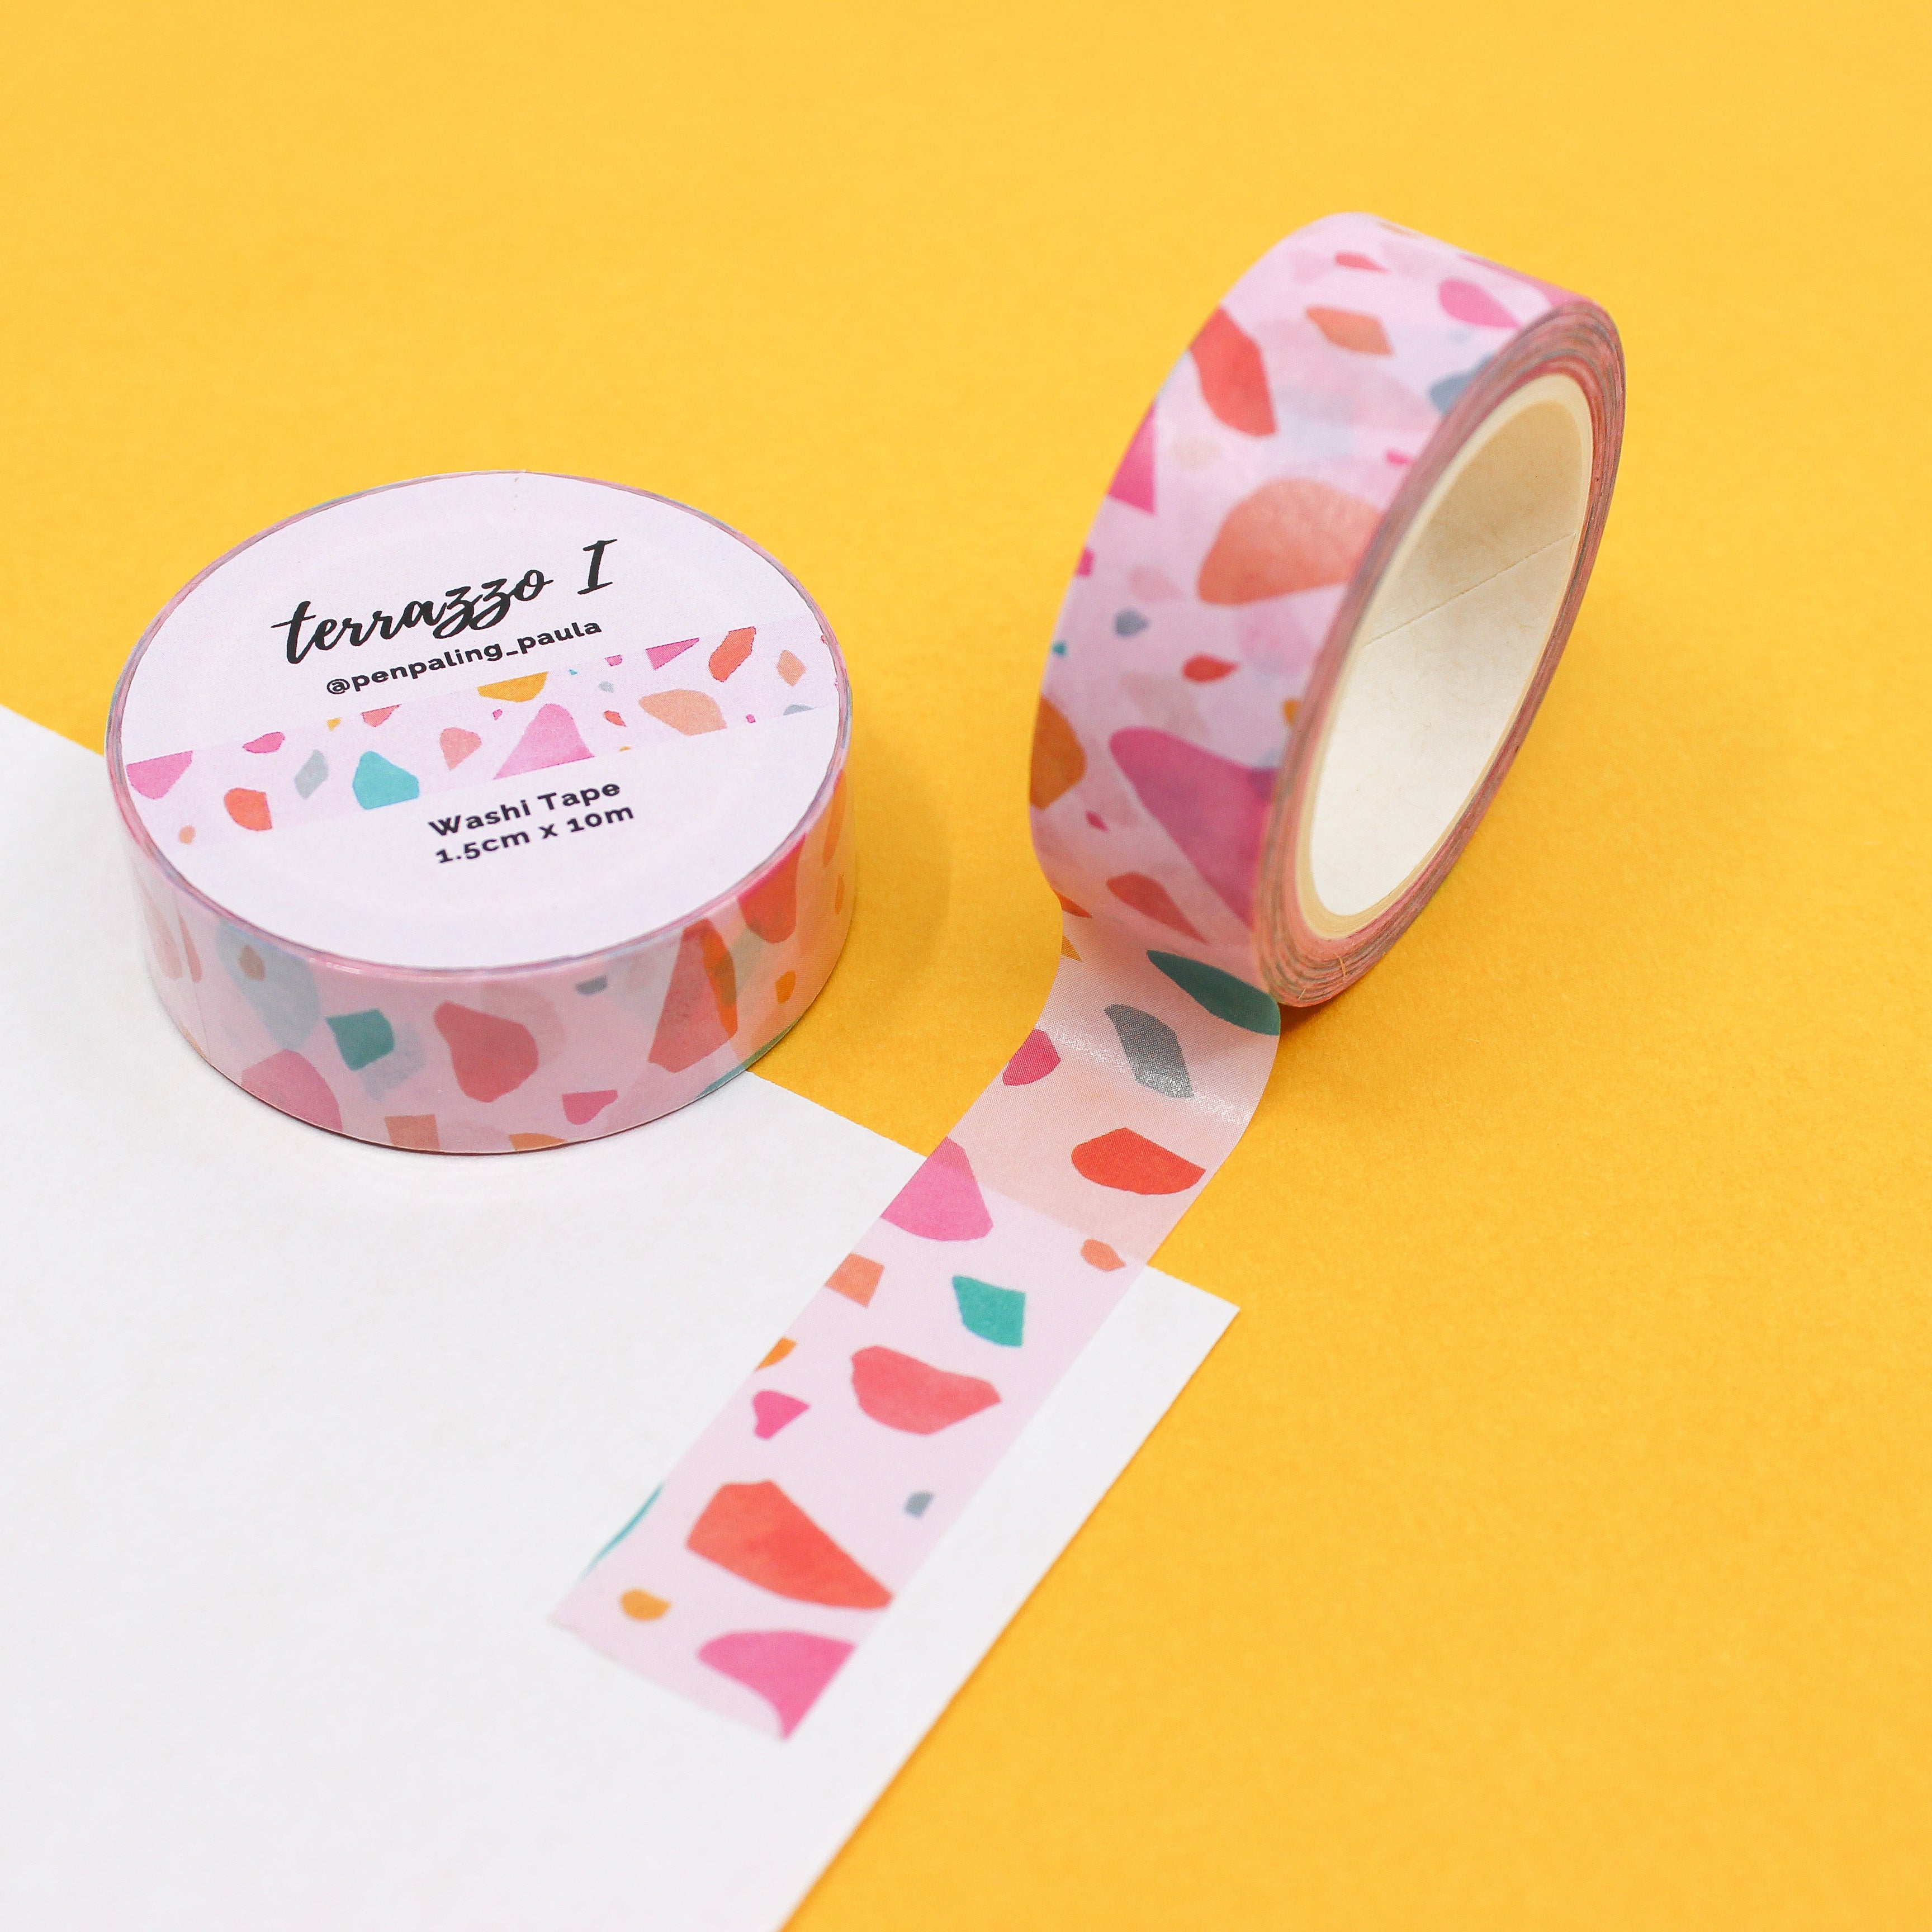 This is a pink terrazzo themed washi tape from BBB Supplies Craft Shop